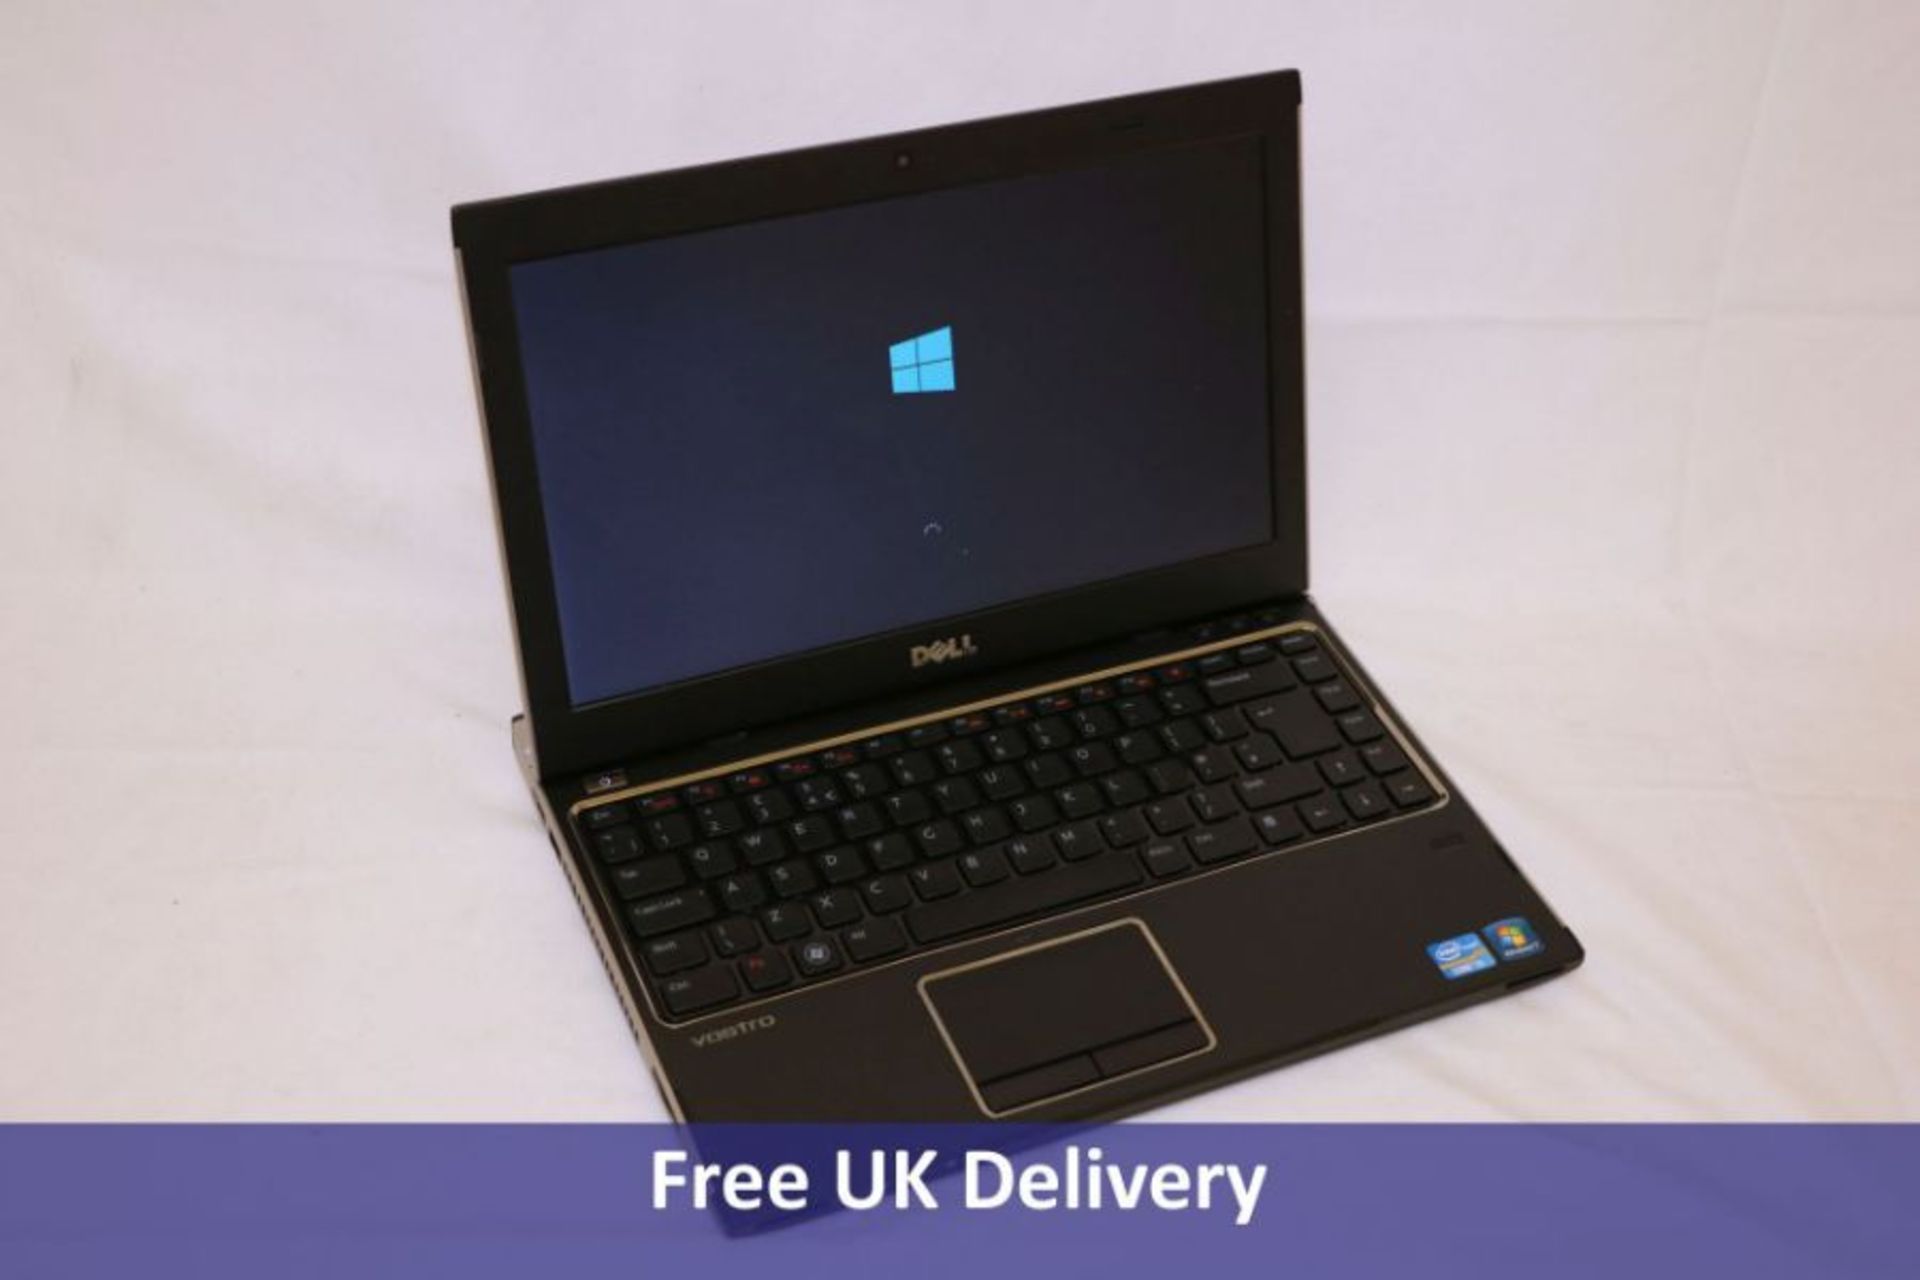 Dell Vostro V131 Laptop, Core i3-2330M, 2GB RAM, 320GB HDD, Windows 10. Used, no box or power supply